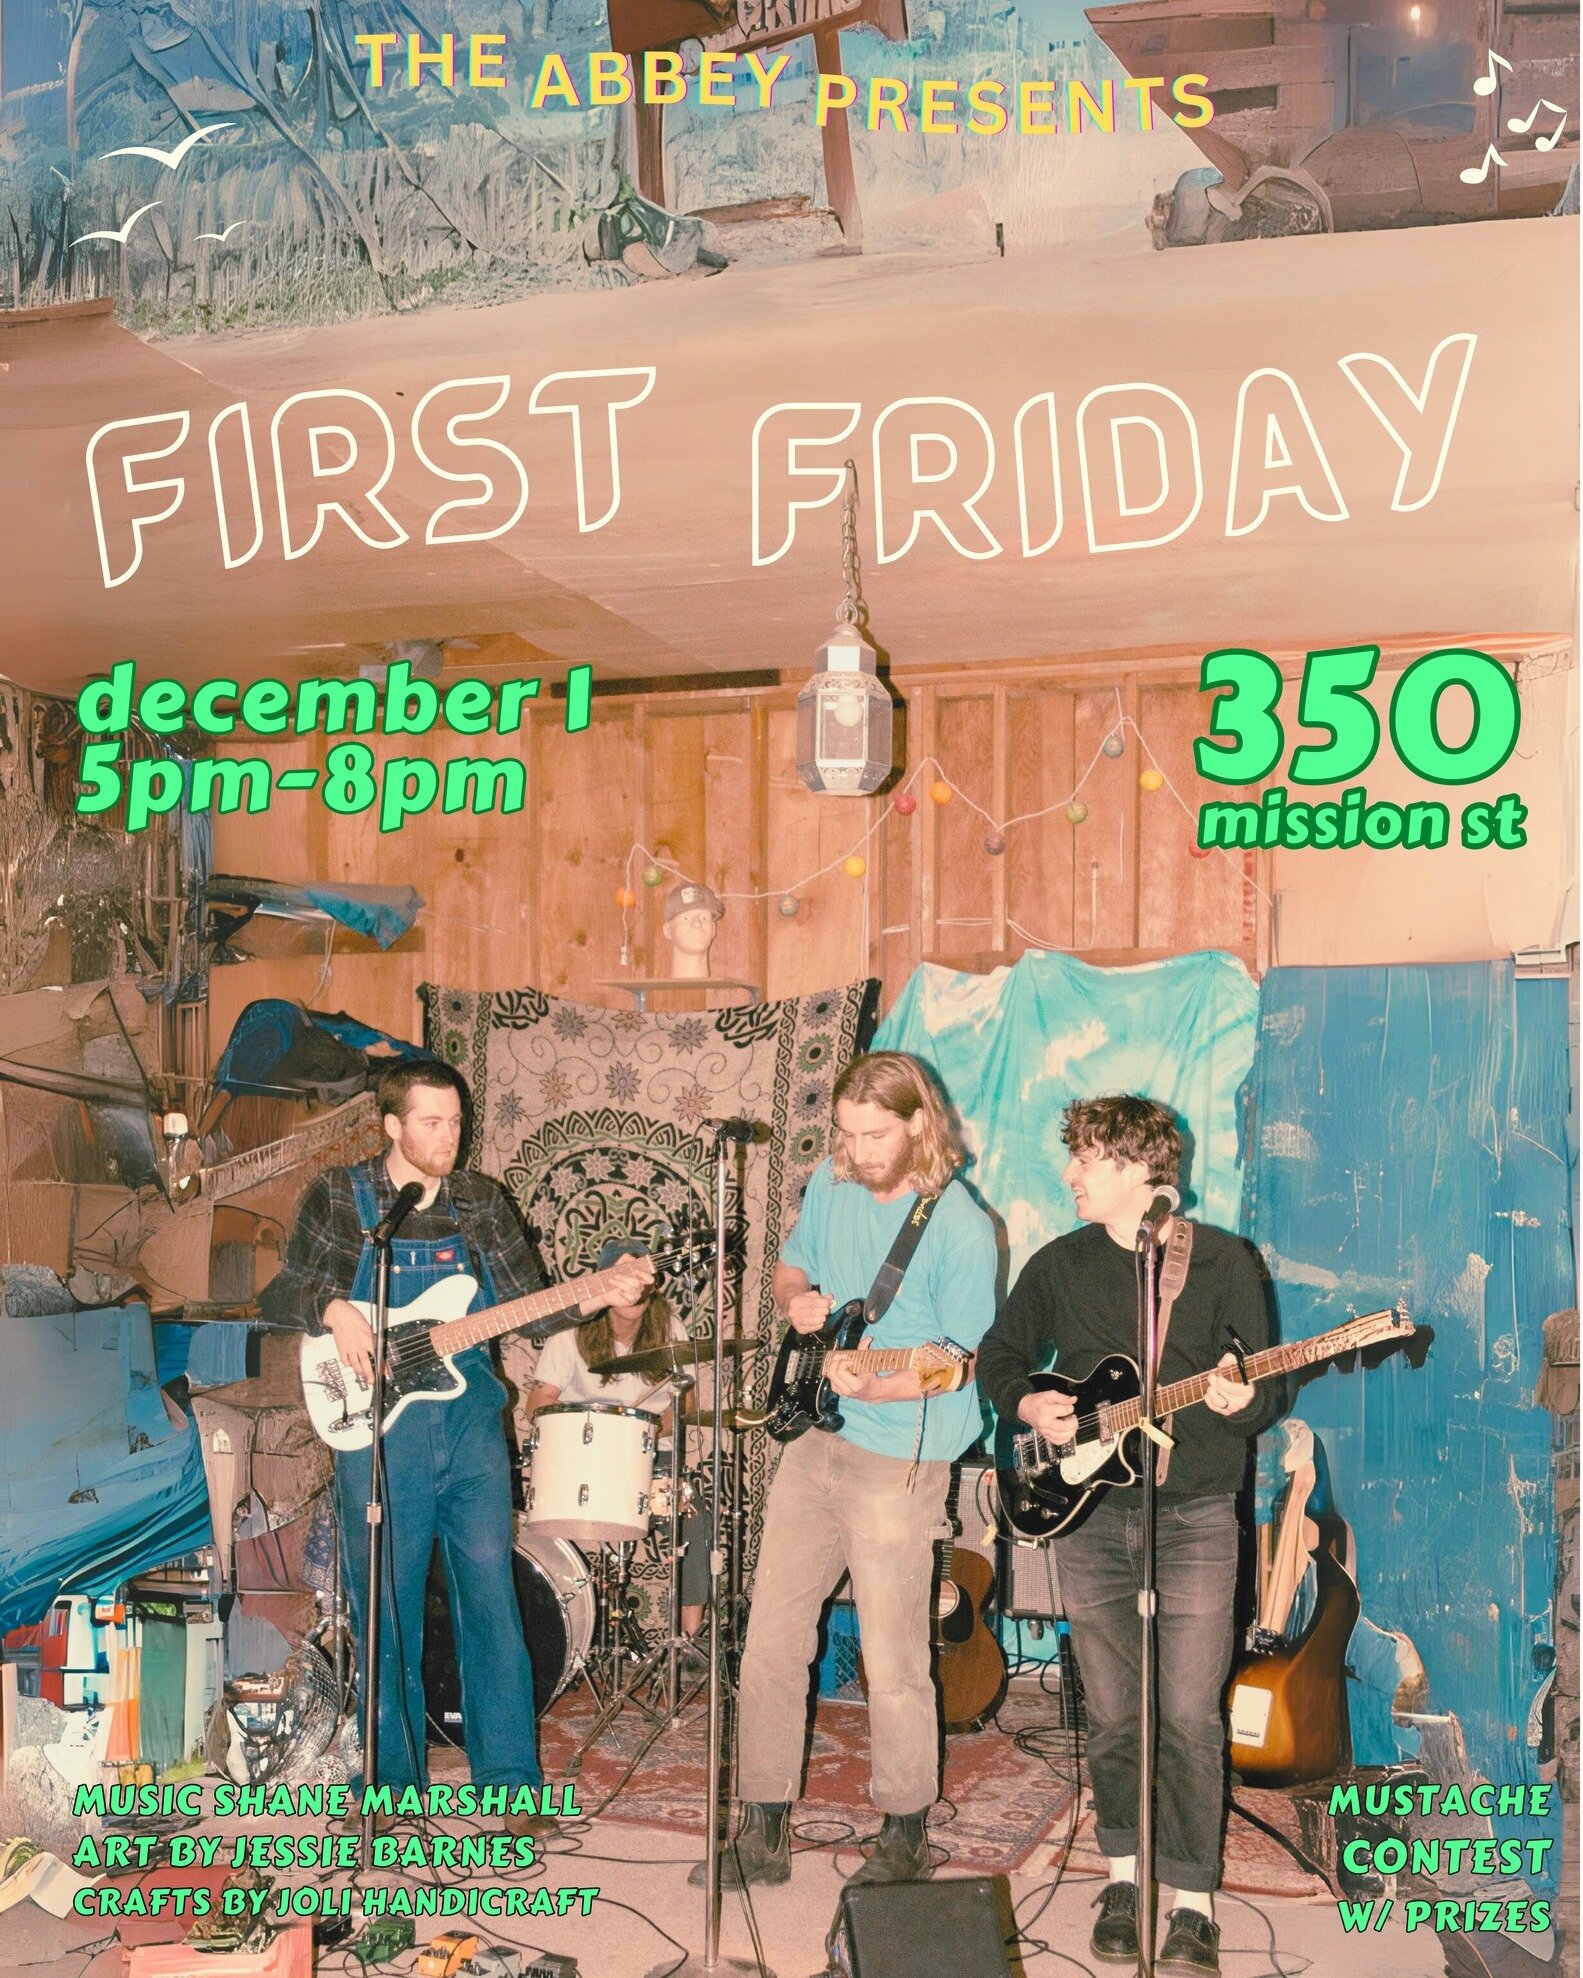 Next week is First Friday!! Come listen to the indominatable @shanemarrshall and sport your best mustache or make one with @jolihandicraftsllc for a chance to win an Abbey gift card. Party from 5pm-8pm.
#theabbeysc #ucsc #downtownsc #firstfriday #liv